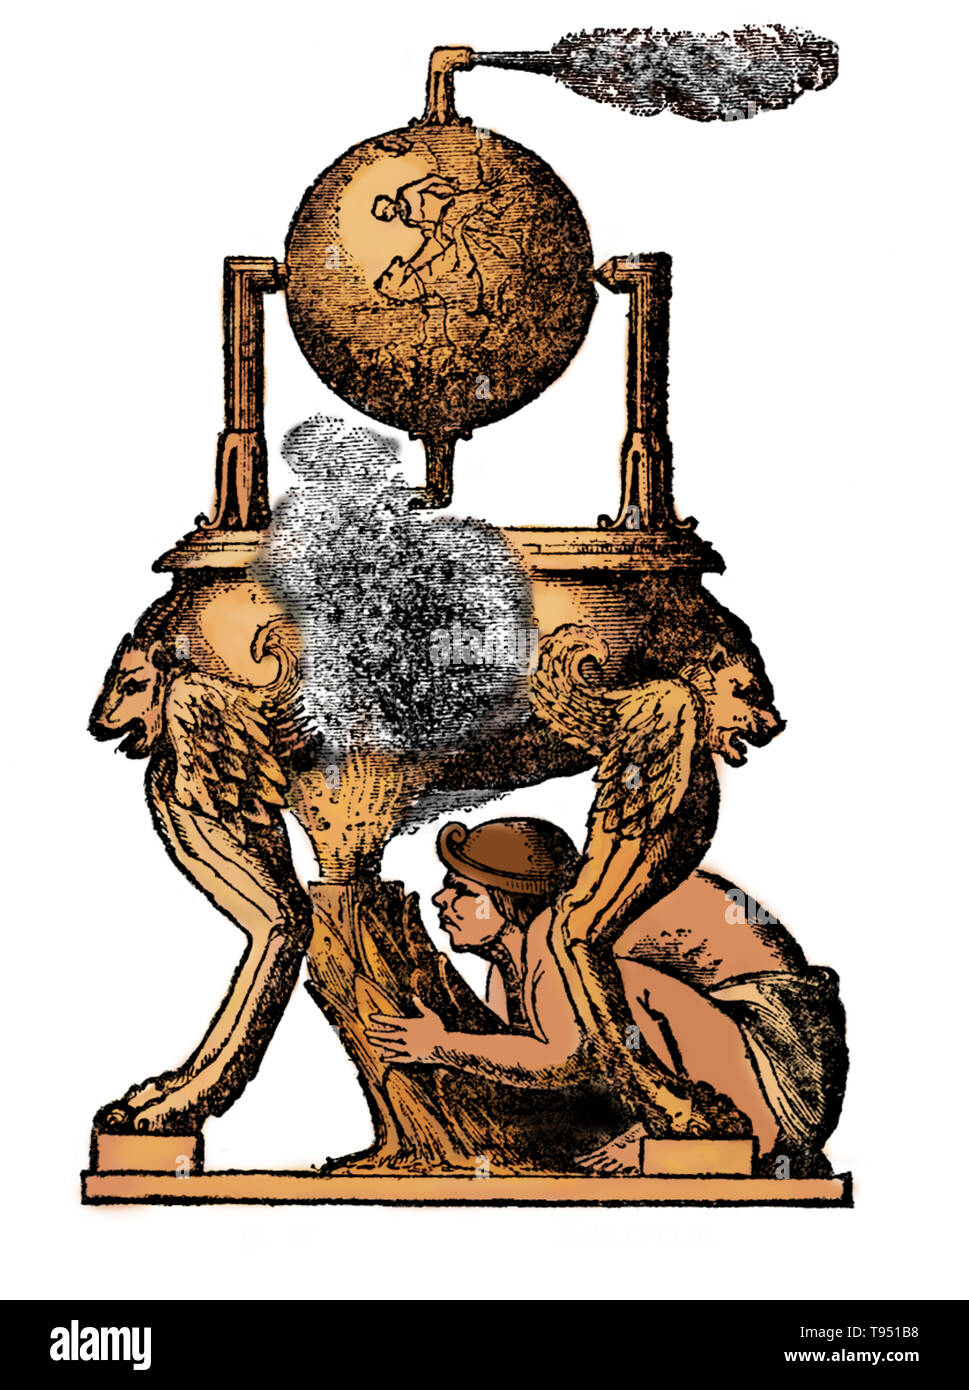 In the first century AD a Greek inventor known as Hero of Alexandria came up with a new invention that depended more on the mechanical interaction of heat and water. He invented a rocket-like device called an aeolipile, also known as Hero's engine. It used steam for propulsion. Hero mounted a sphere on top of a water kettle. A fire below the kettle turned the water into steam, and the gas traveled through the pipes to the sphere. Stock Photo